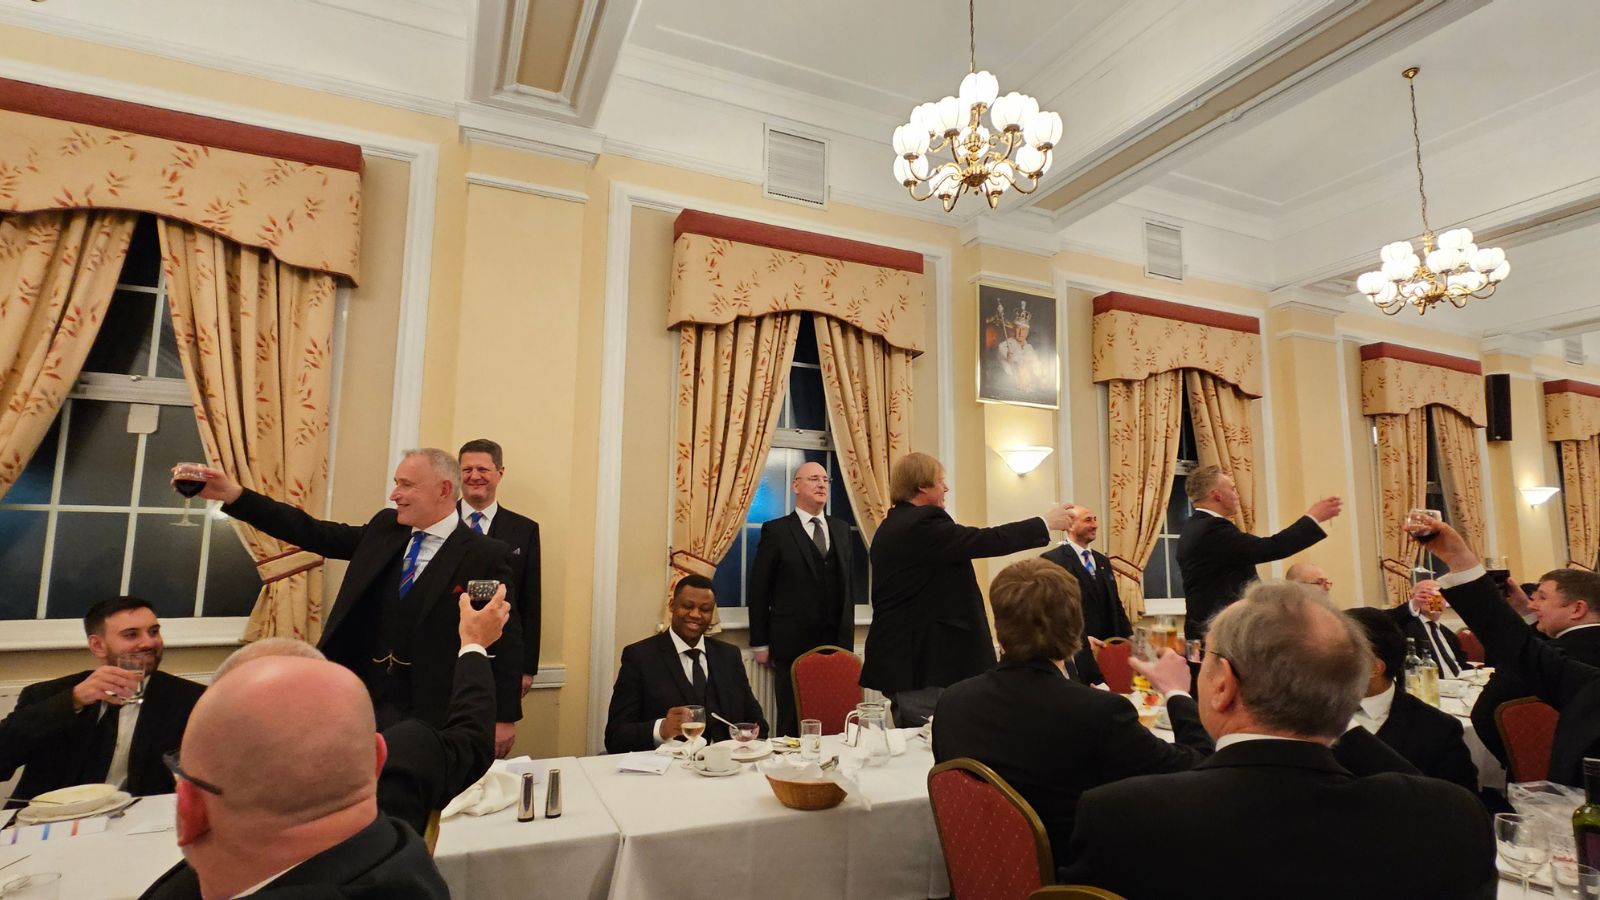 Freemasons at the after-meeting dinner